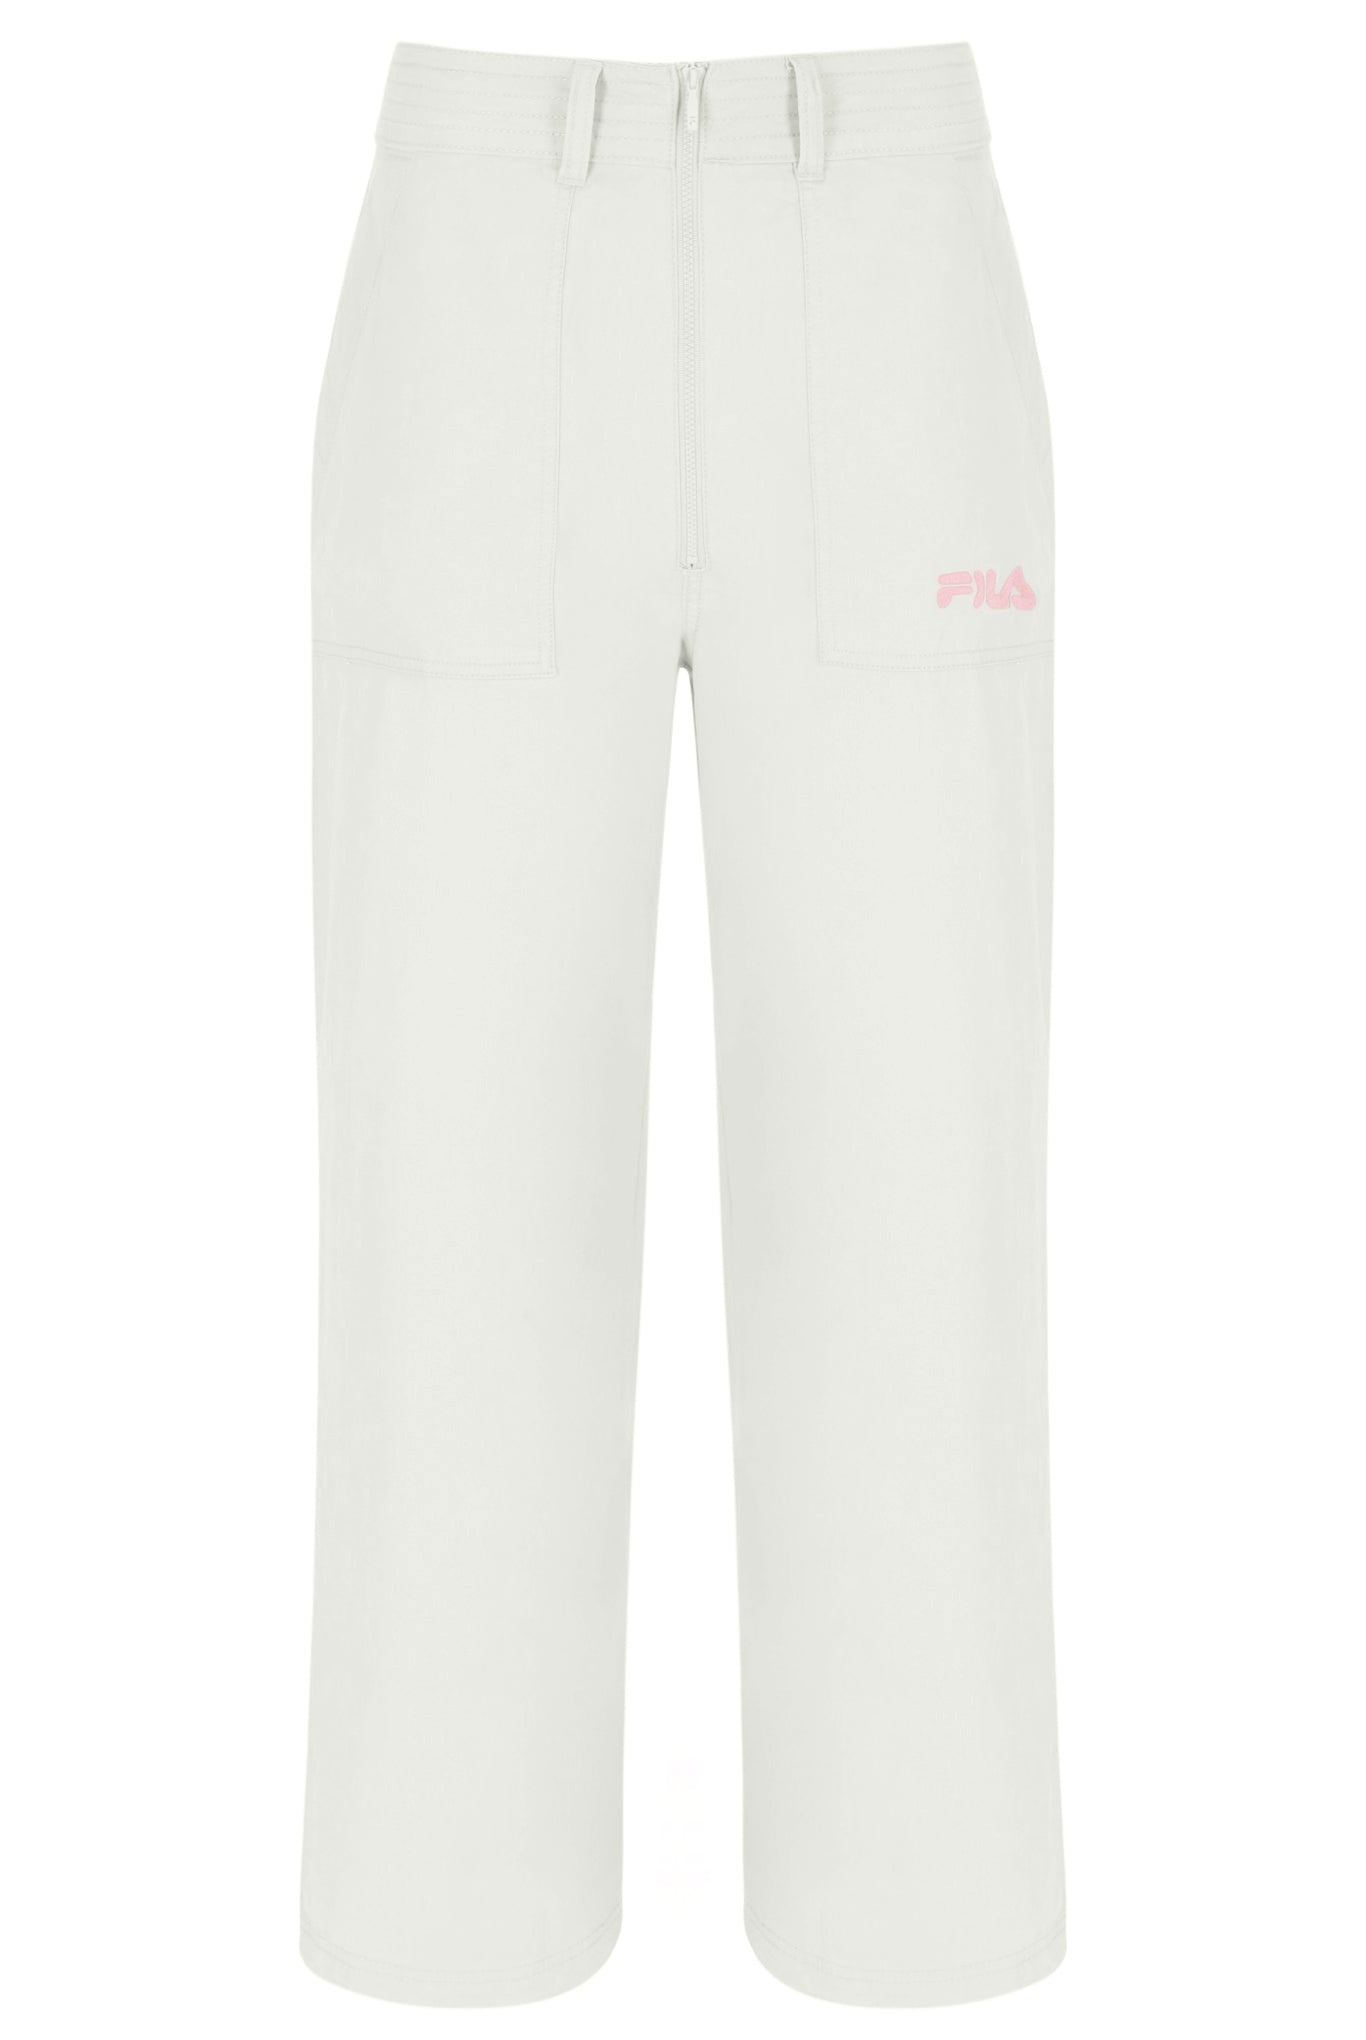 Sports cargo trousers - Grey - Ladies | H&M IN